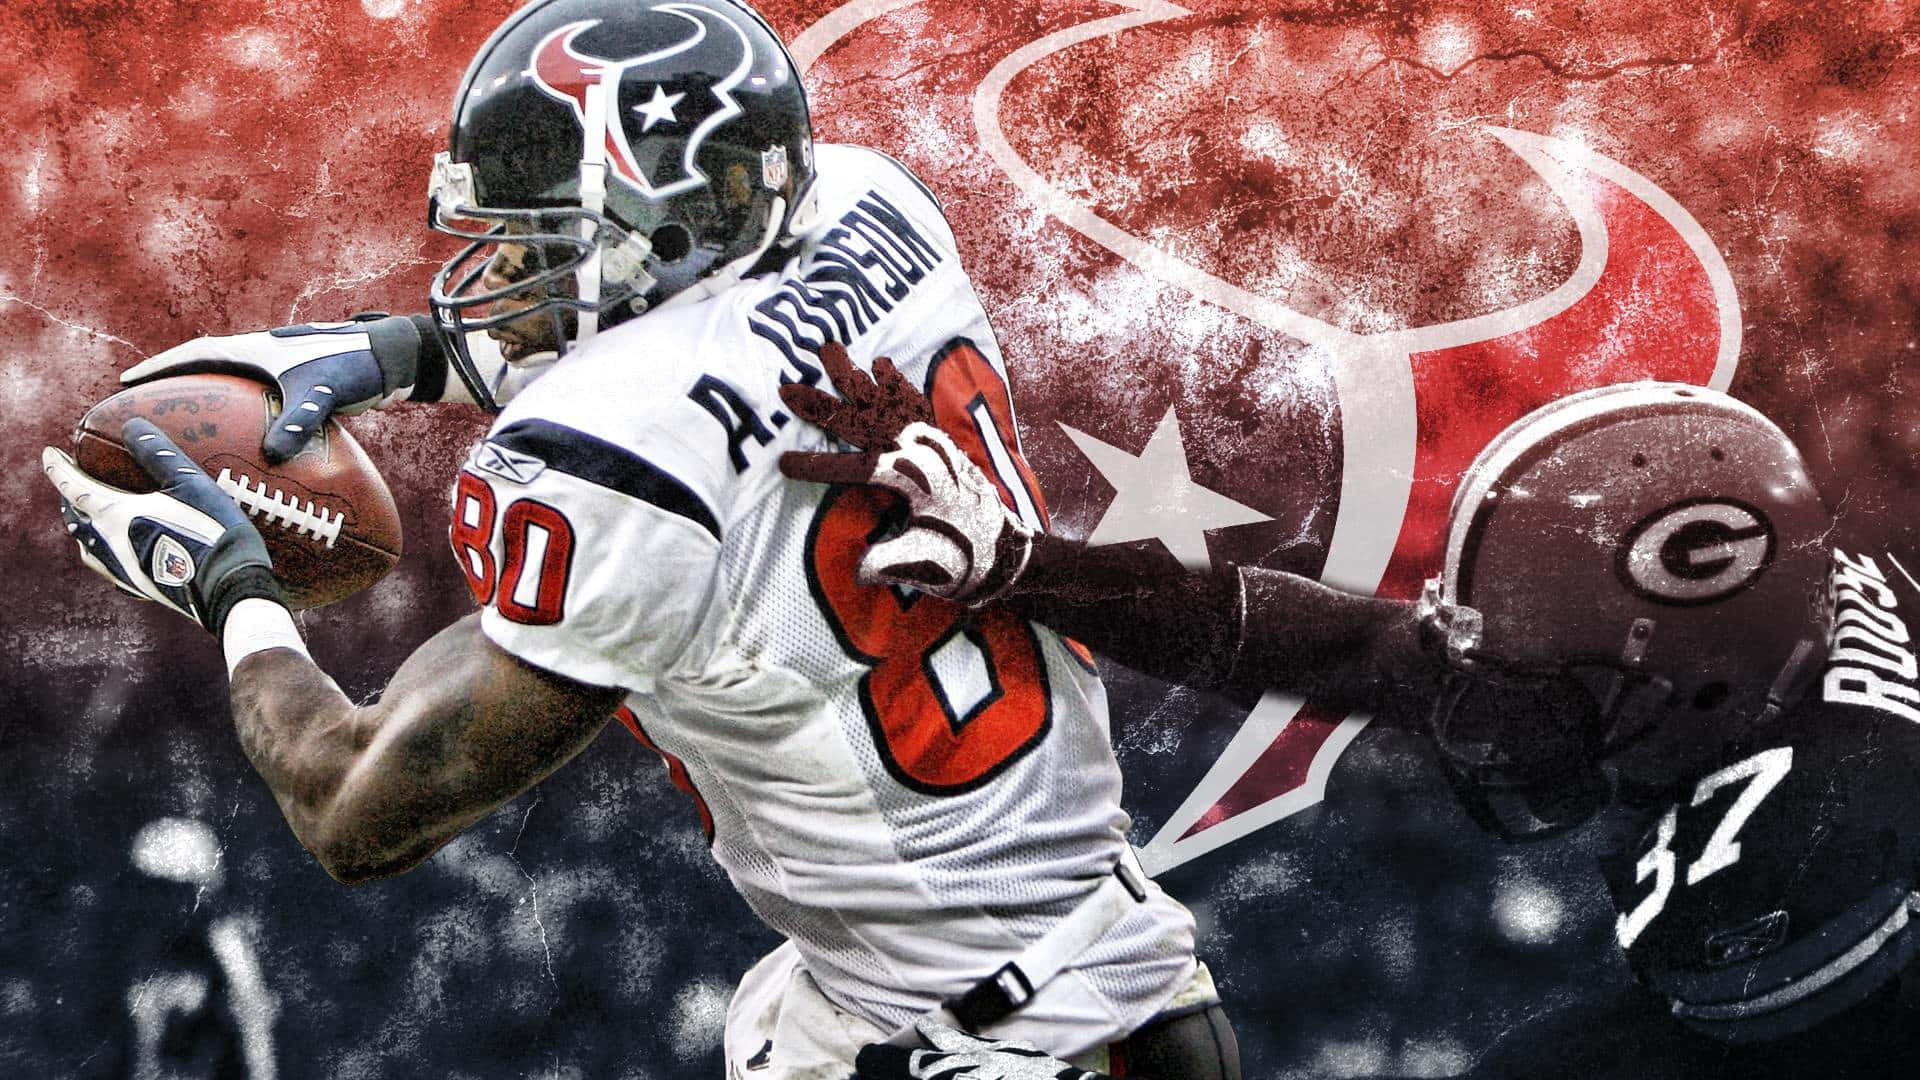 Competitive Nfl Playoff Game In Full Swing Wallpaper